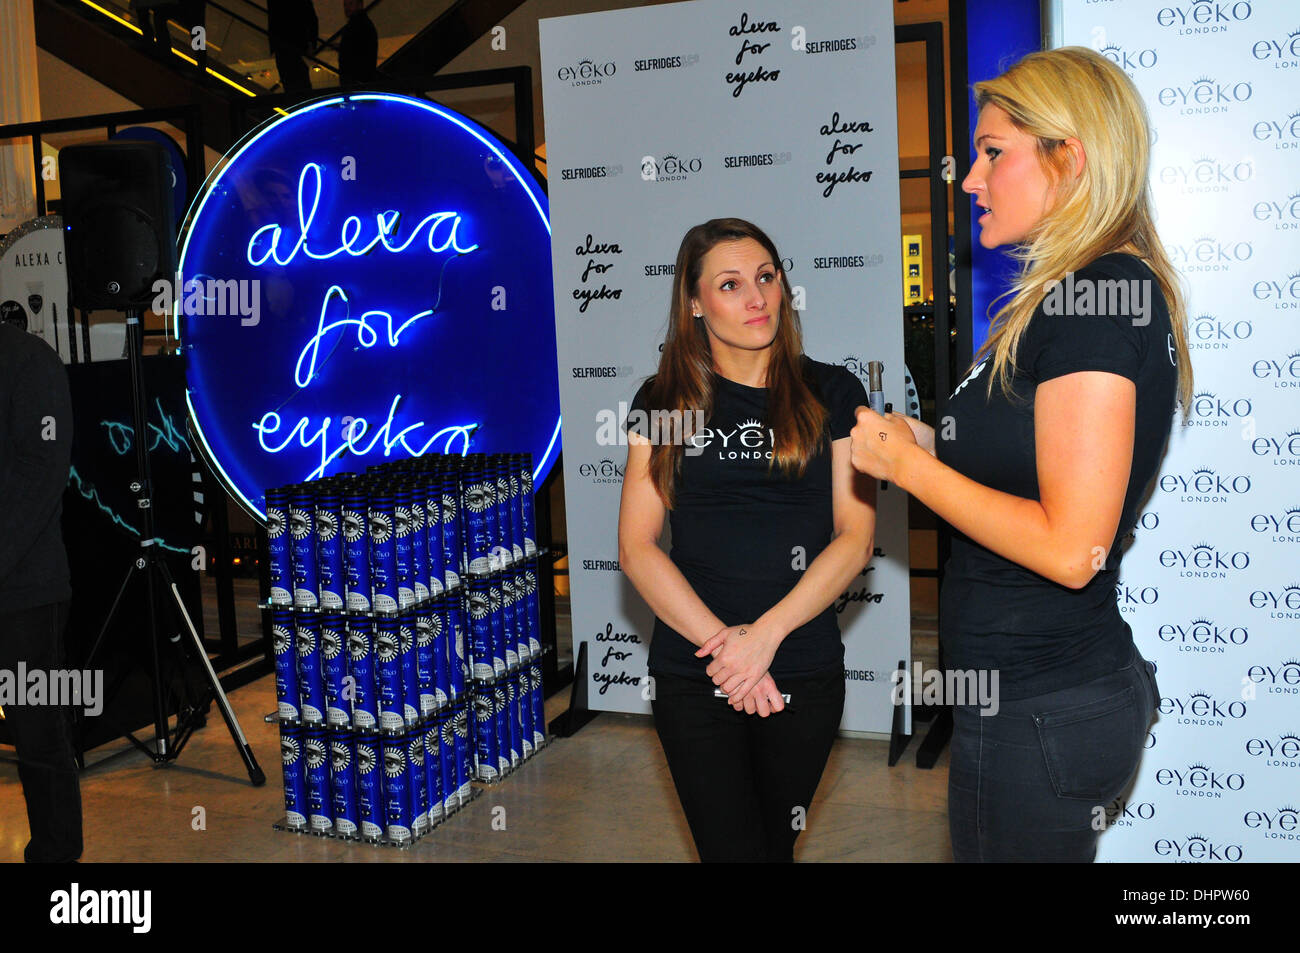 London England 14th Nov 2013 : Alexa Chung Alexa Chung will be launching her new make up collaboration with British make up brand Eyeko in Oxford Circus at Selfridges in London. Credit:  See Li/Alamy Live News Stock Photo